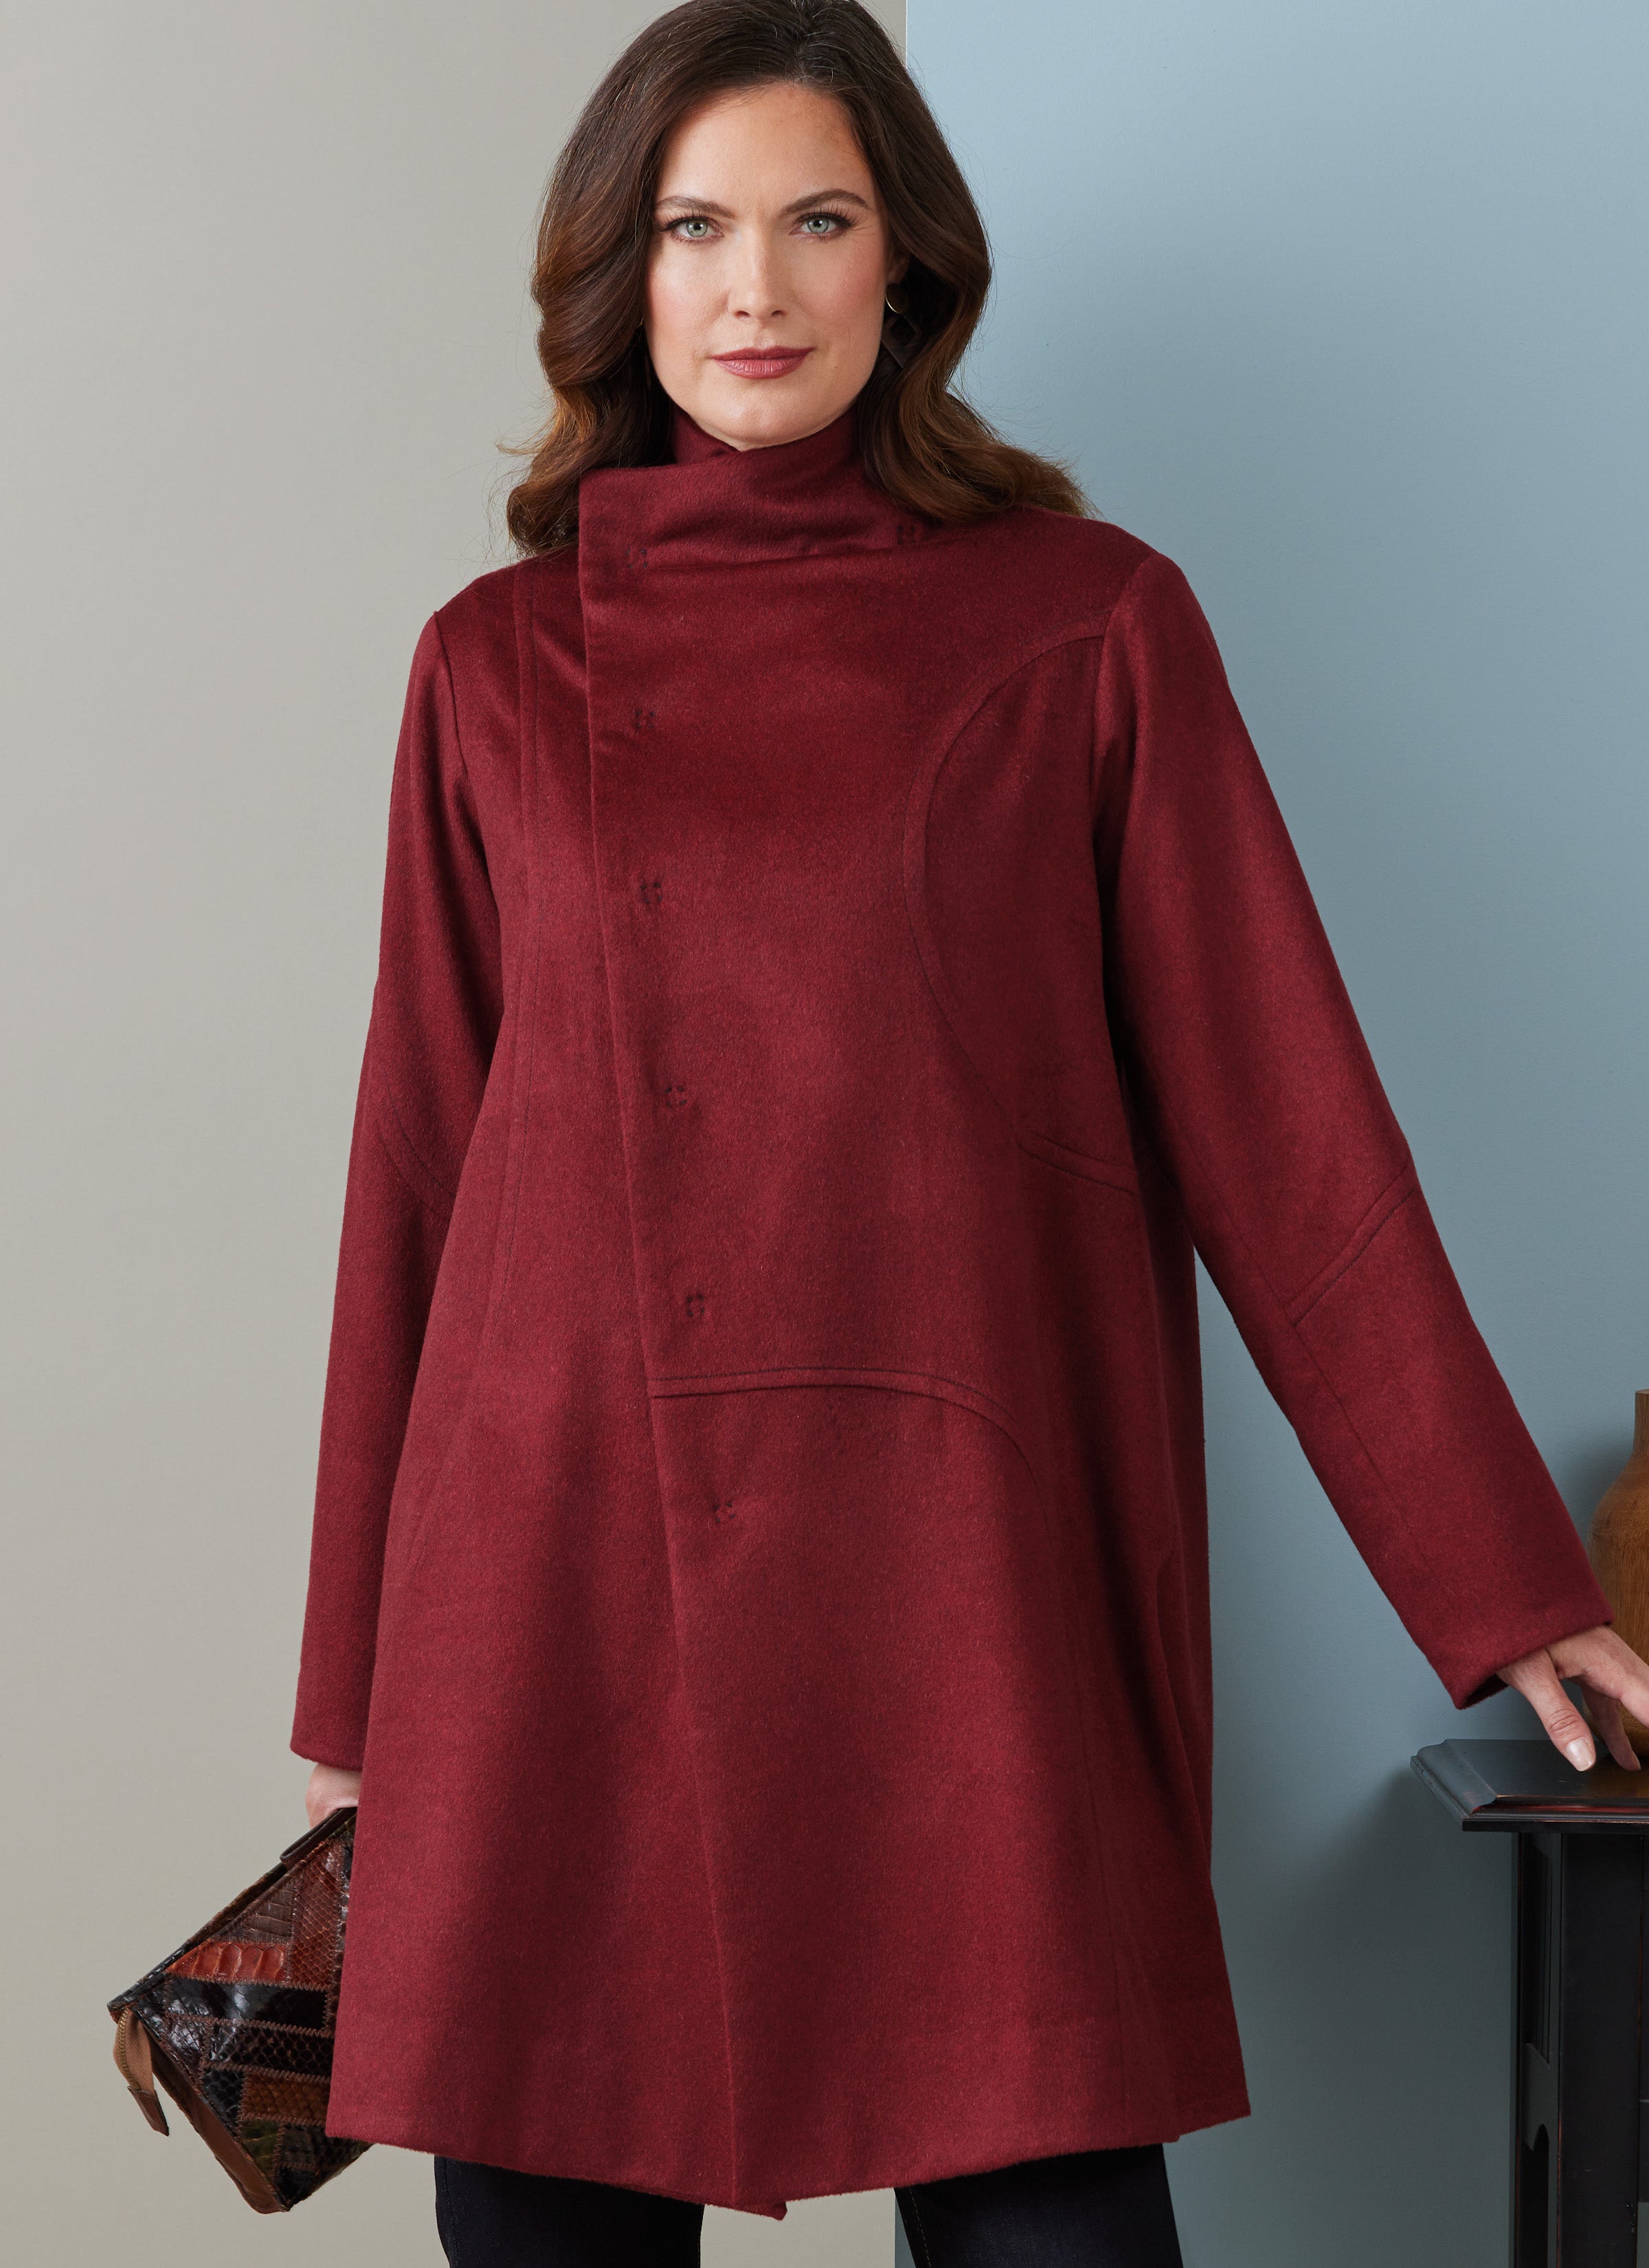 Butterick sewing pattern 6919 Misses' Coat by Katherine Tilton from Jaycotts Sewing Supplies